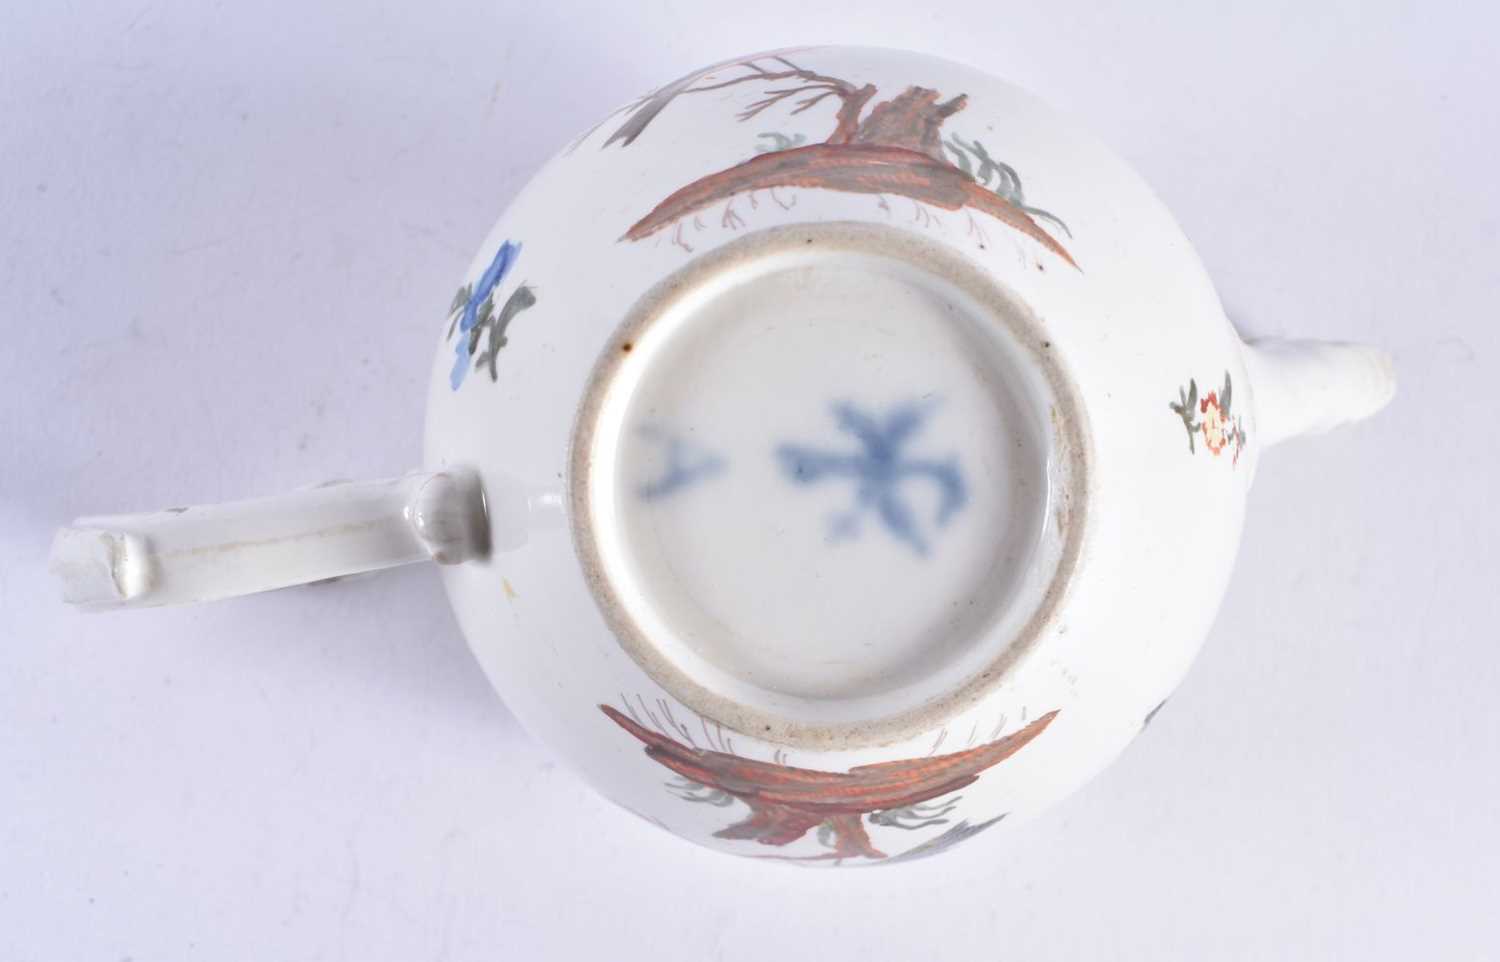 A RARE 18TH CENTURY GERMAN PORCELAIN BULLET FORM TEAPOT AND COVER painted in the Meissen style - Bild 6 aus 6